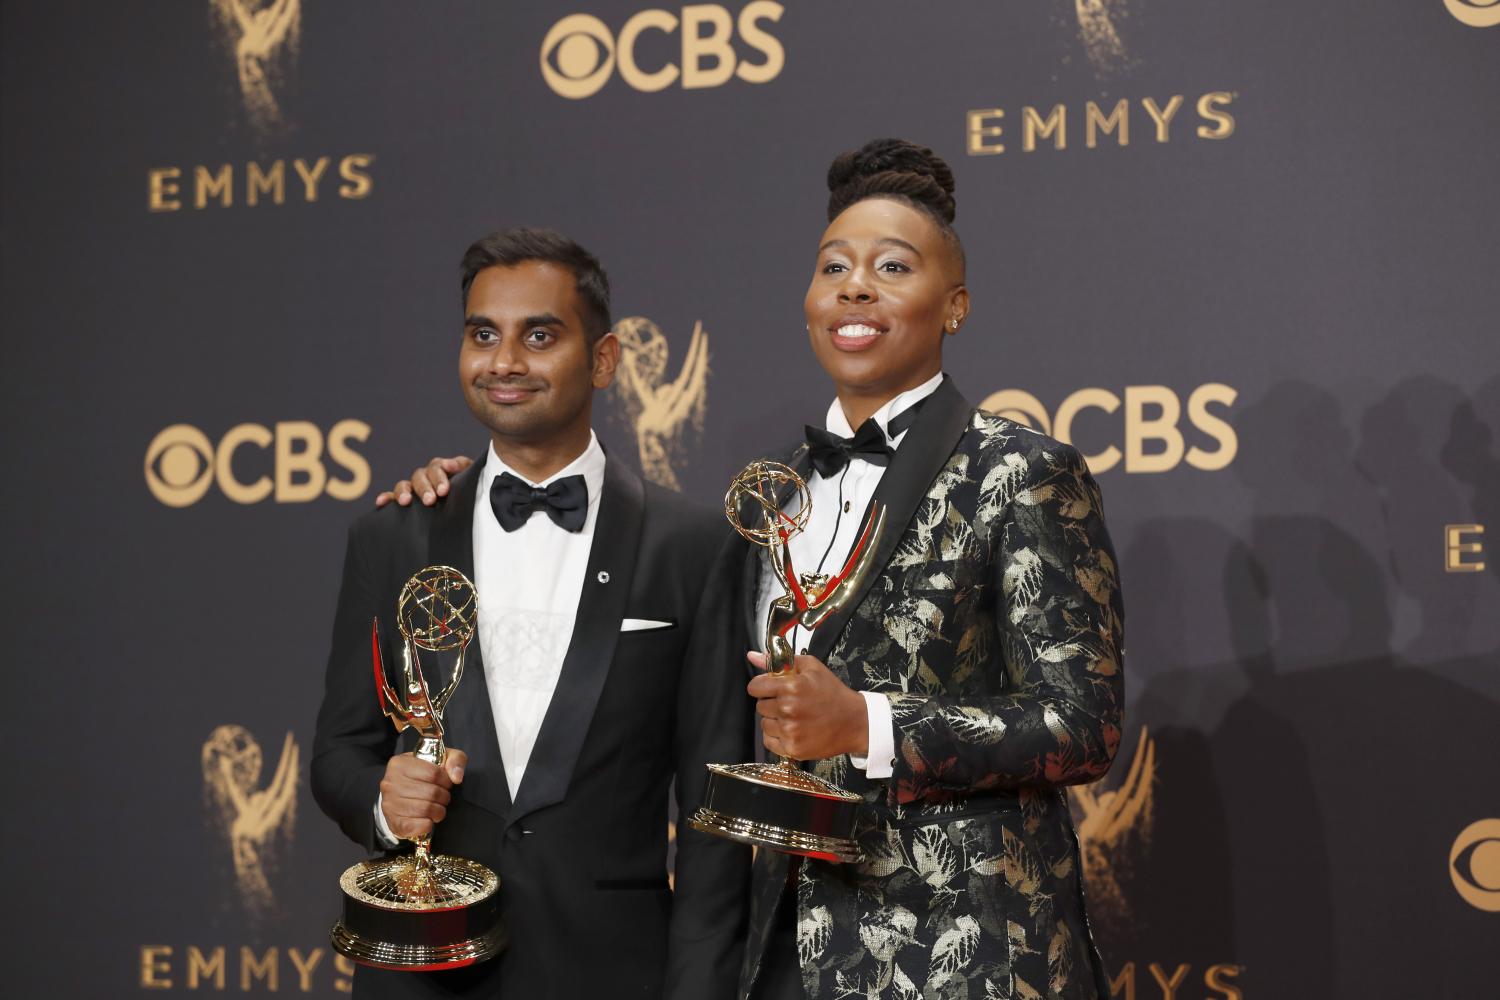 Among all the Emmy breakthrough moments, add Riz Ahmed’s and Aziz Ansari’s awards for shows that destroy Muslim stereotypes  (PHOTO)